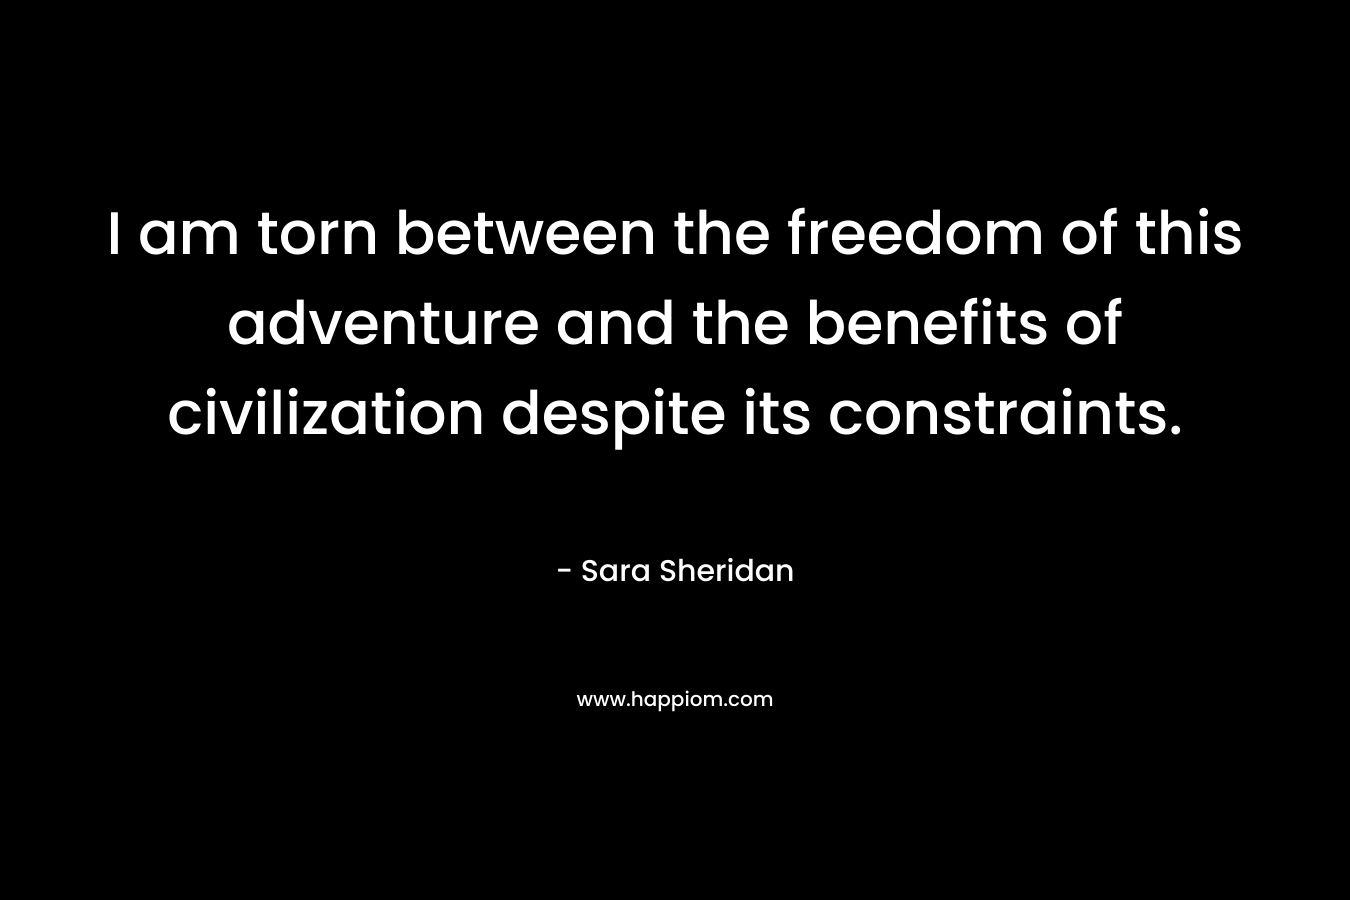  I am torn between the freedom of this adventure and the benefits of civilization despite its constraints.